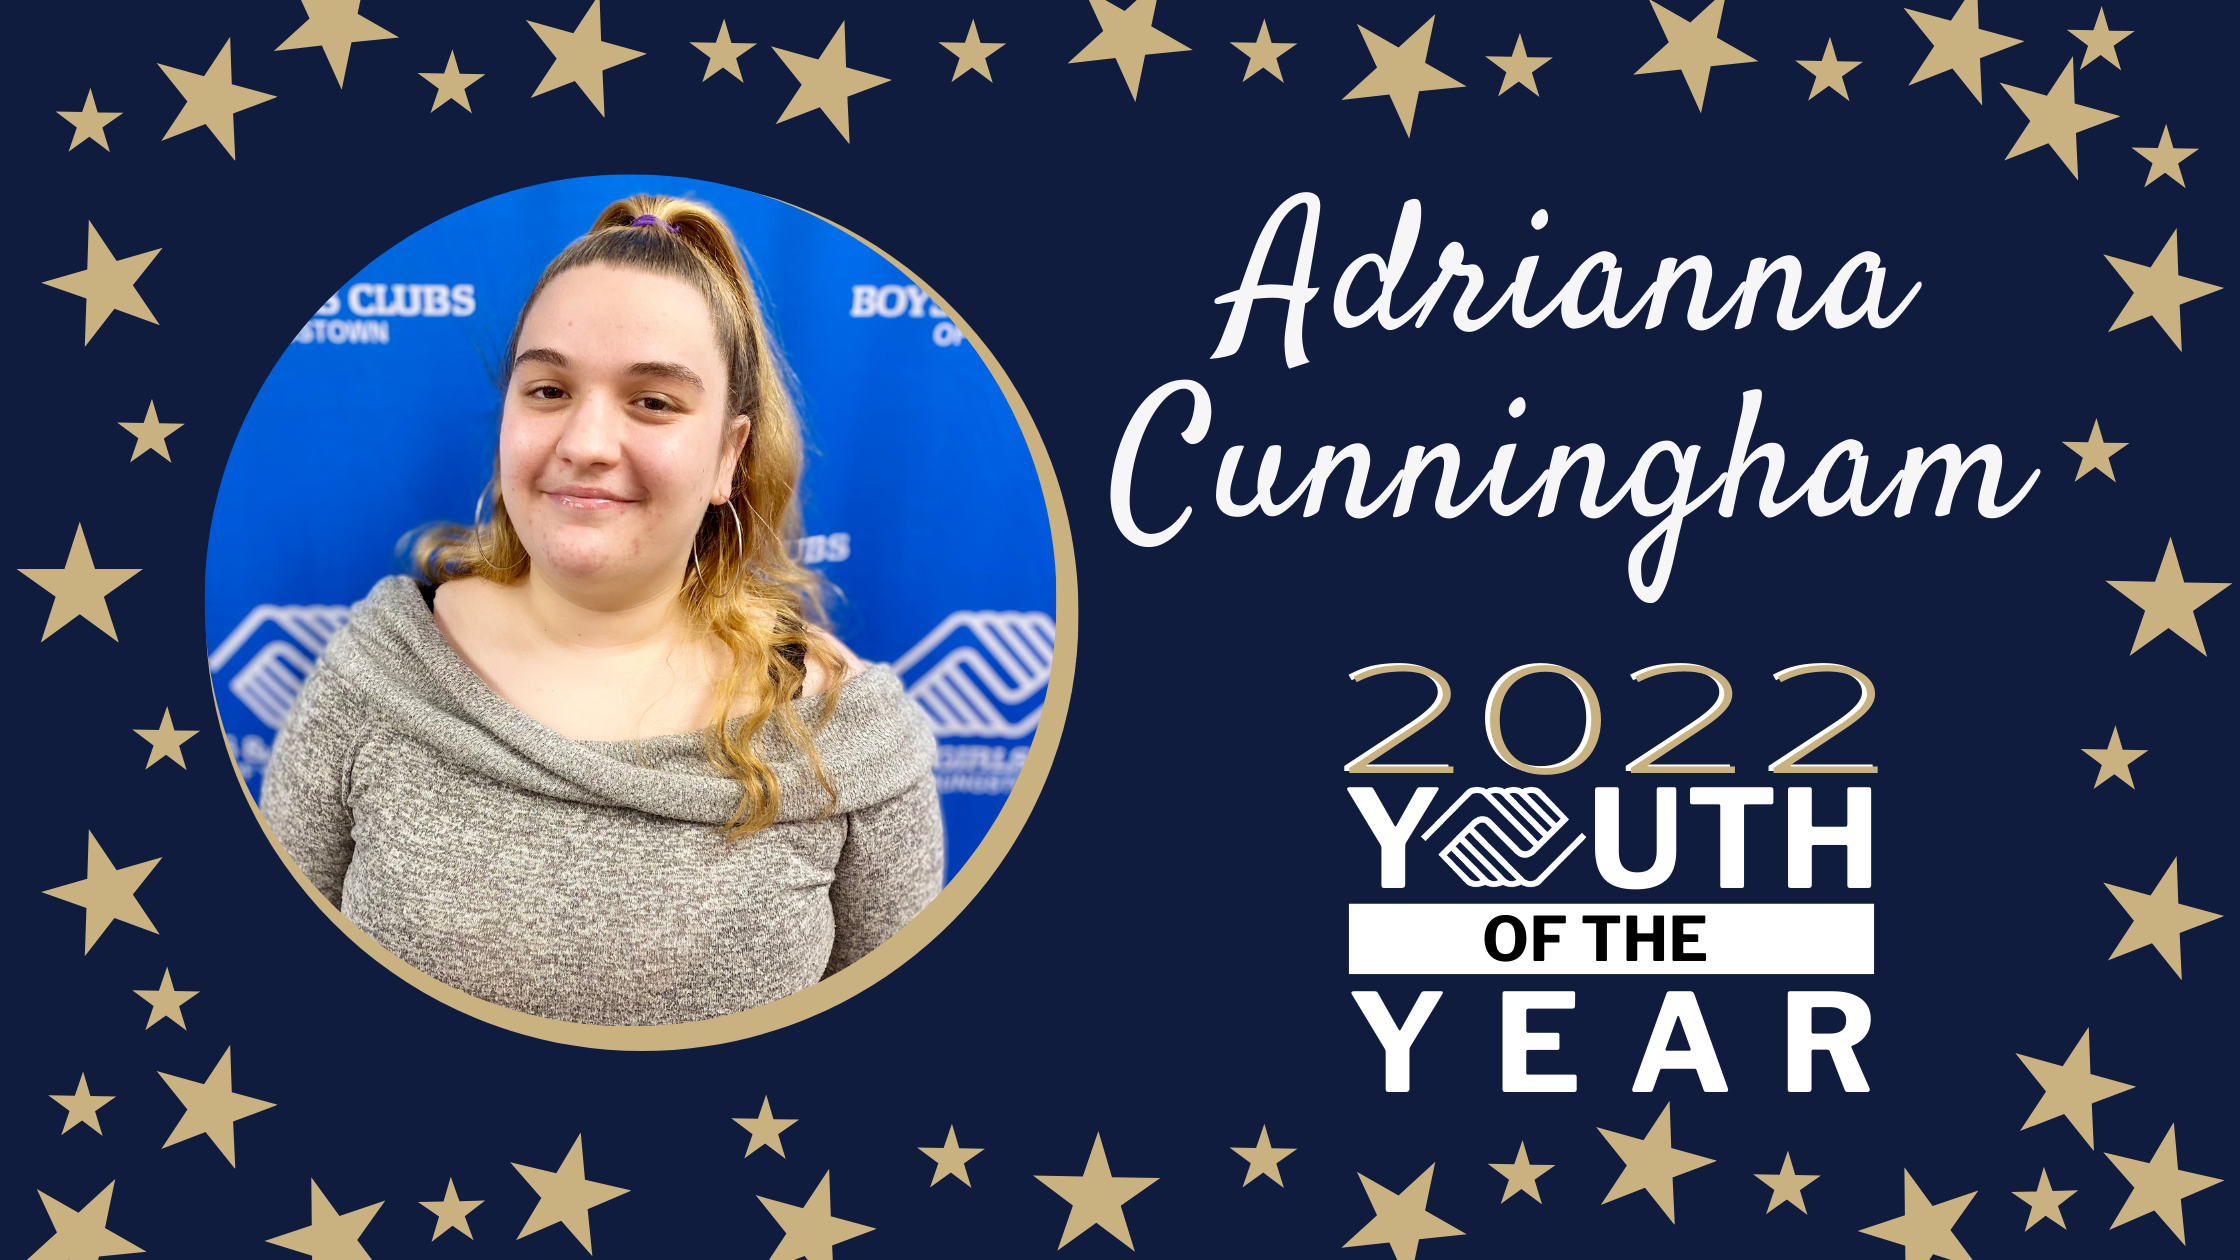 BGCY Announces 2022 Youth of the Year